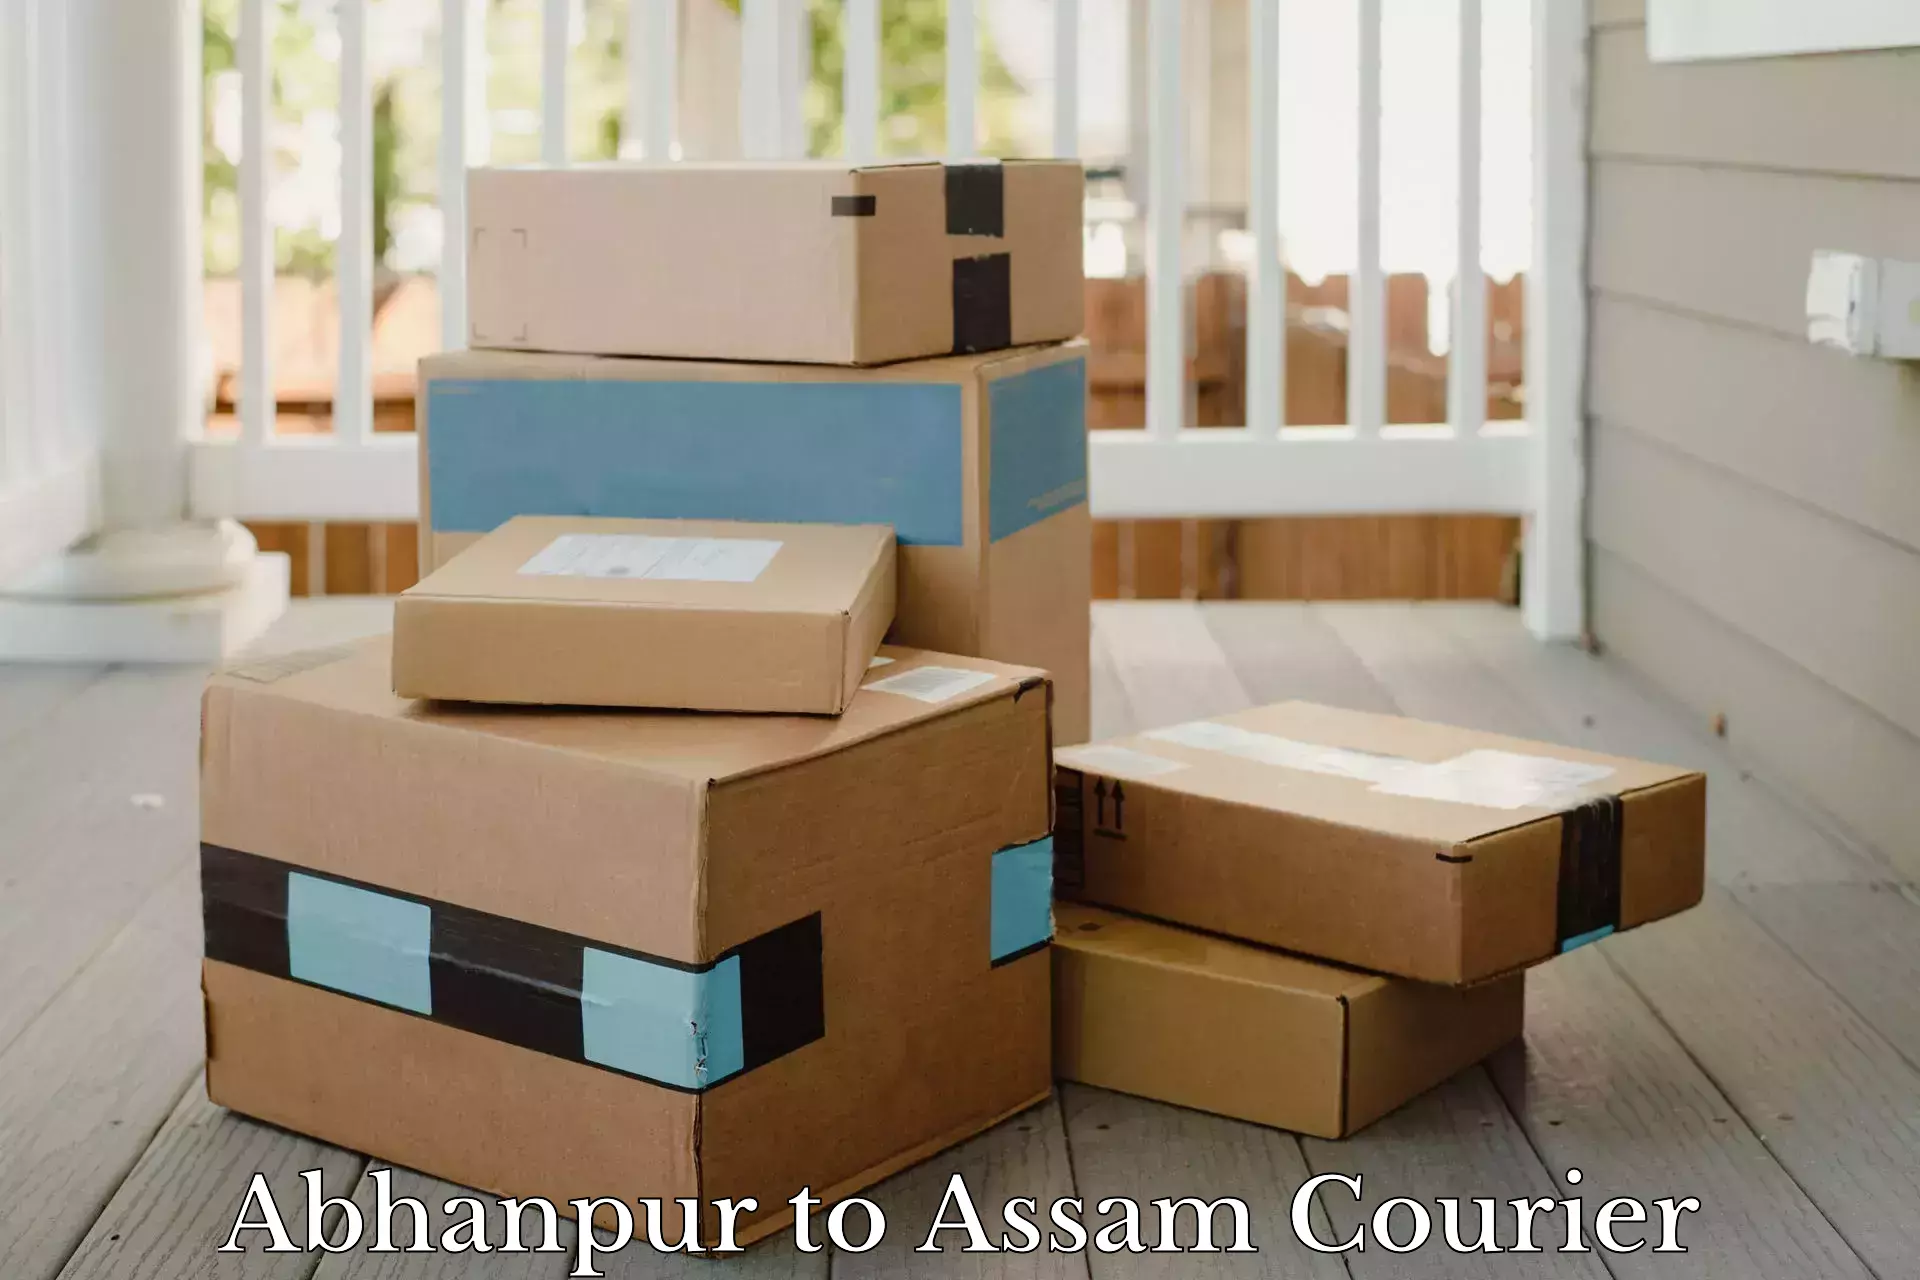 Express logistics providers in Abhanpur to Tezpur University